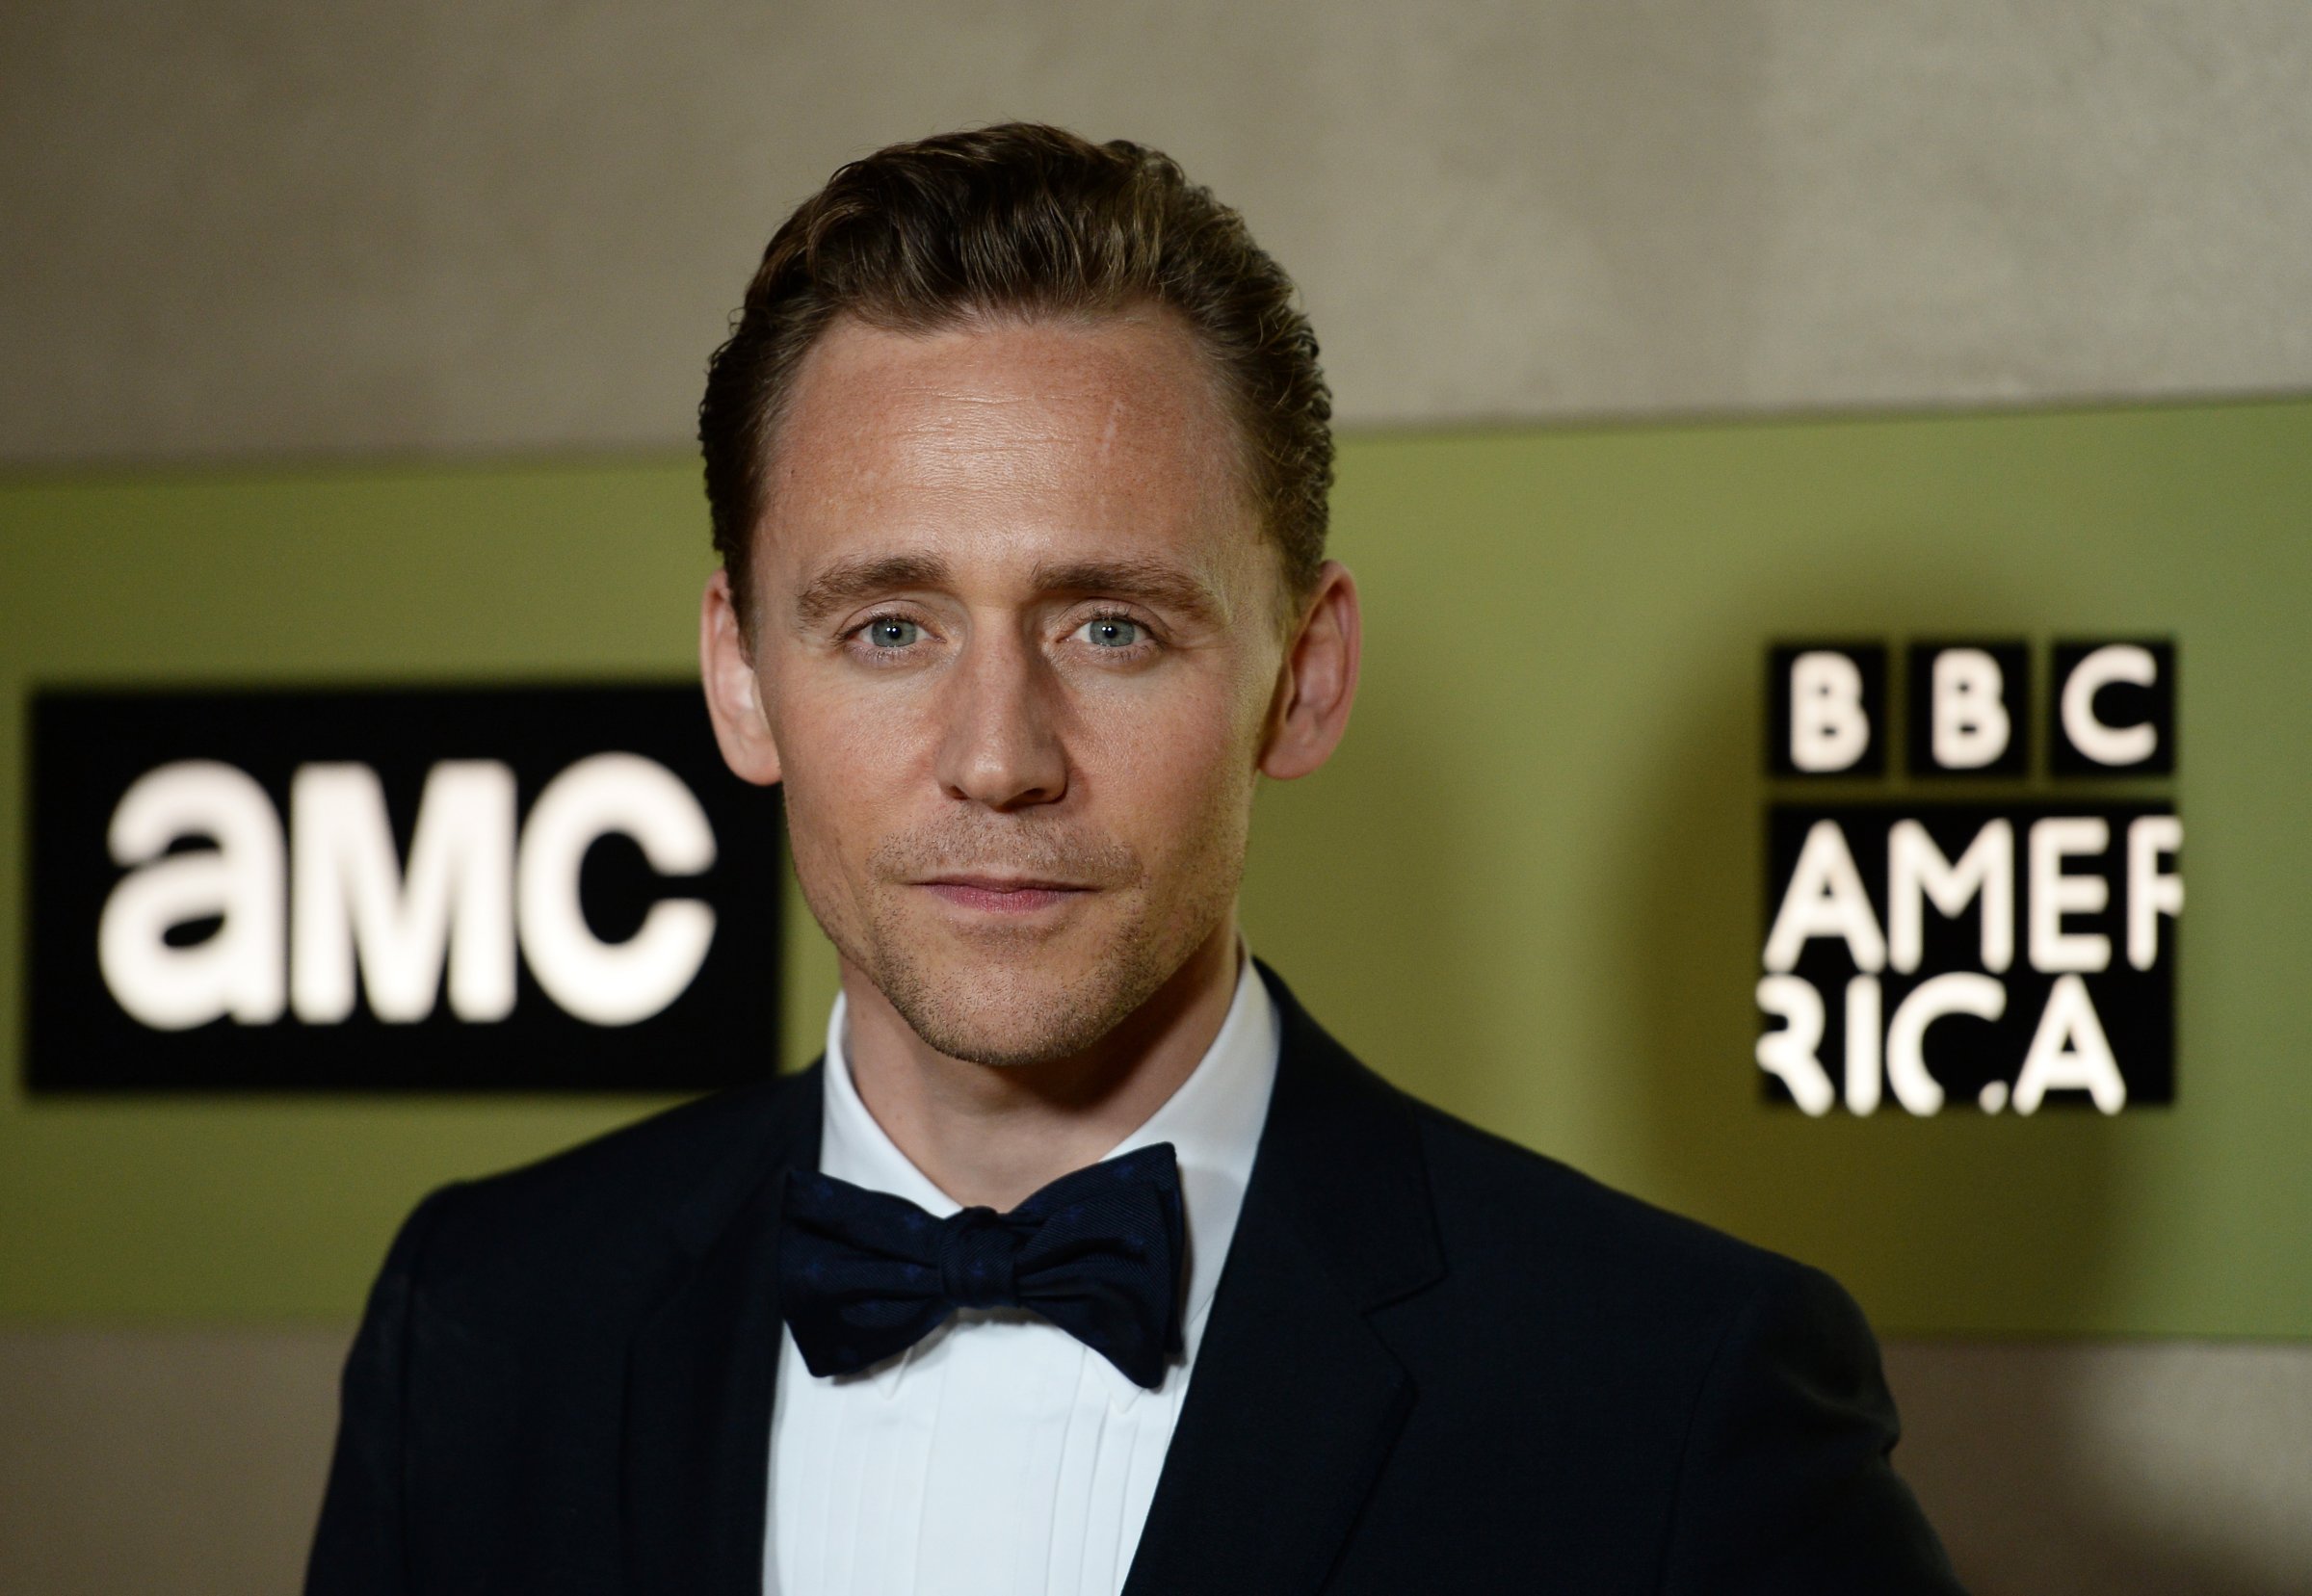 Actor Tom Hiddleston arrives at the AMC Networks' 68th Primetime Emmy Awards After-Party Celebration at BOA Steakhouse on September 18, 2016 in West Hollywood, California.